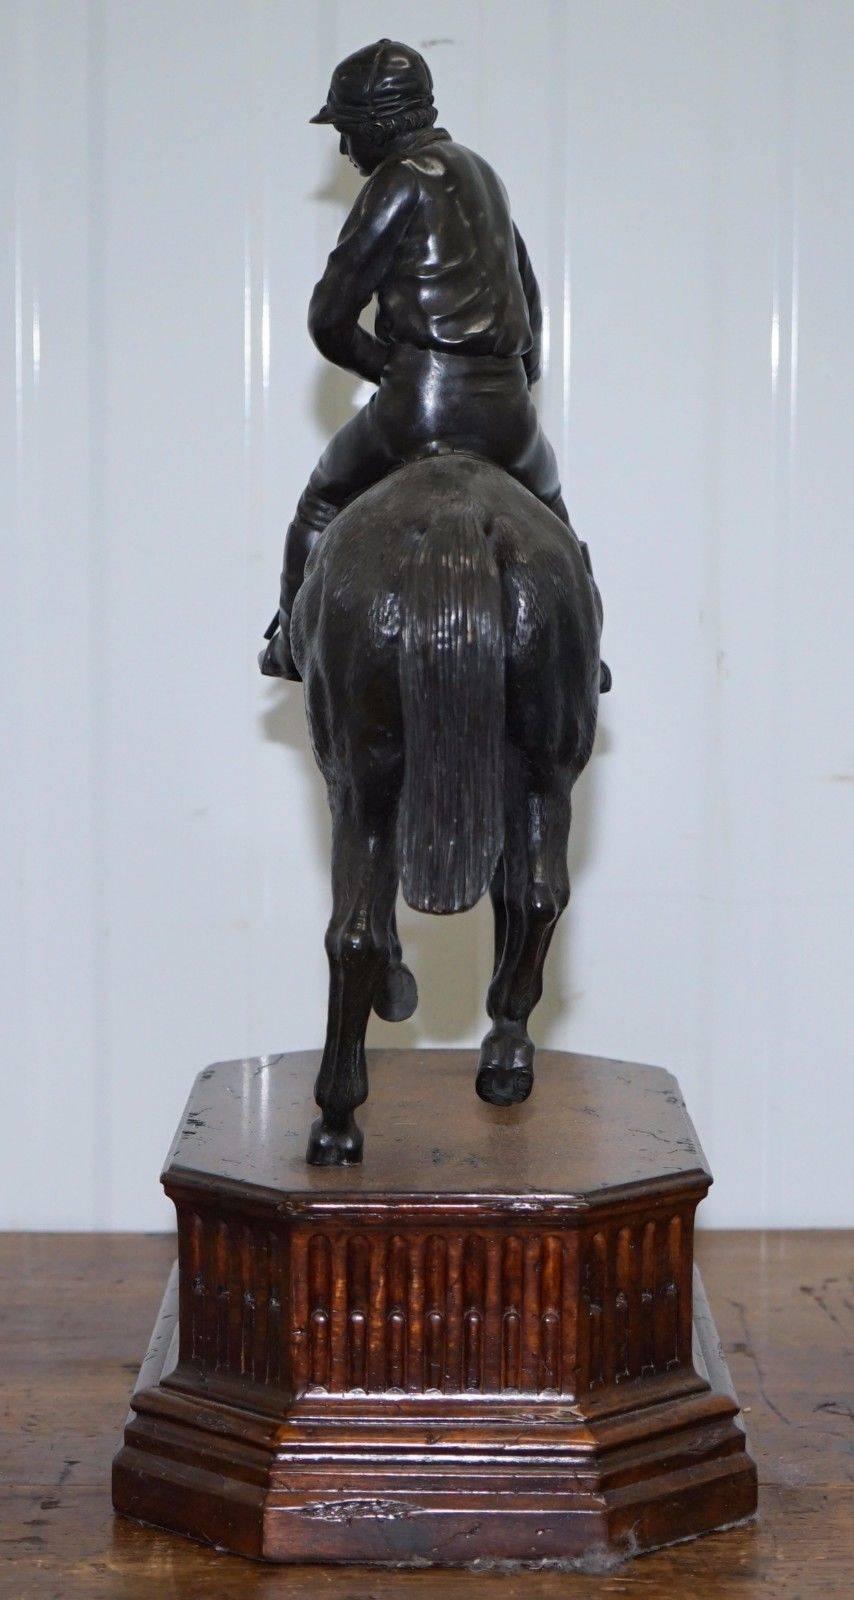 Hand-Crafted Very Large Solid Bronze Equestrian Horse with Jockey on a Walnut Base Rare Find